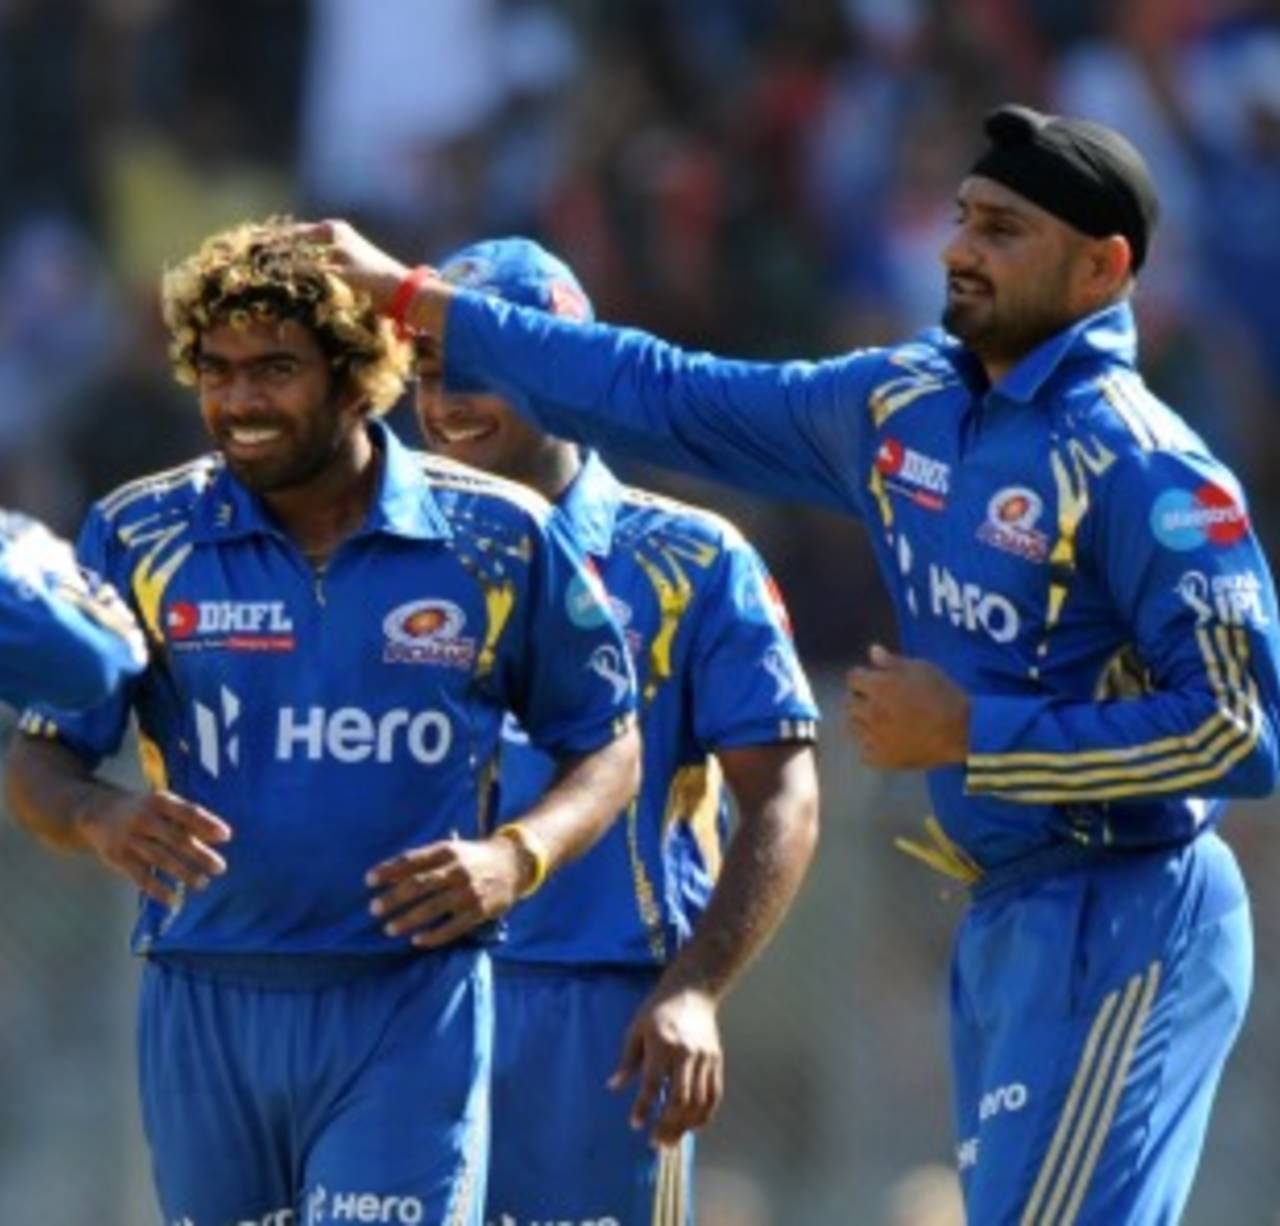 Lasith Malinga has been the key man for Harbhajan Singh in the last six overs, taking 12 wickets at an average of 3.67 and economy rate of 4.19&nbsp;&nbsp;&bull;&nbsp;&nbsp;AFP